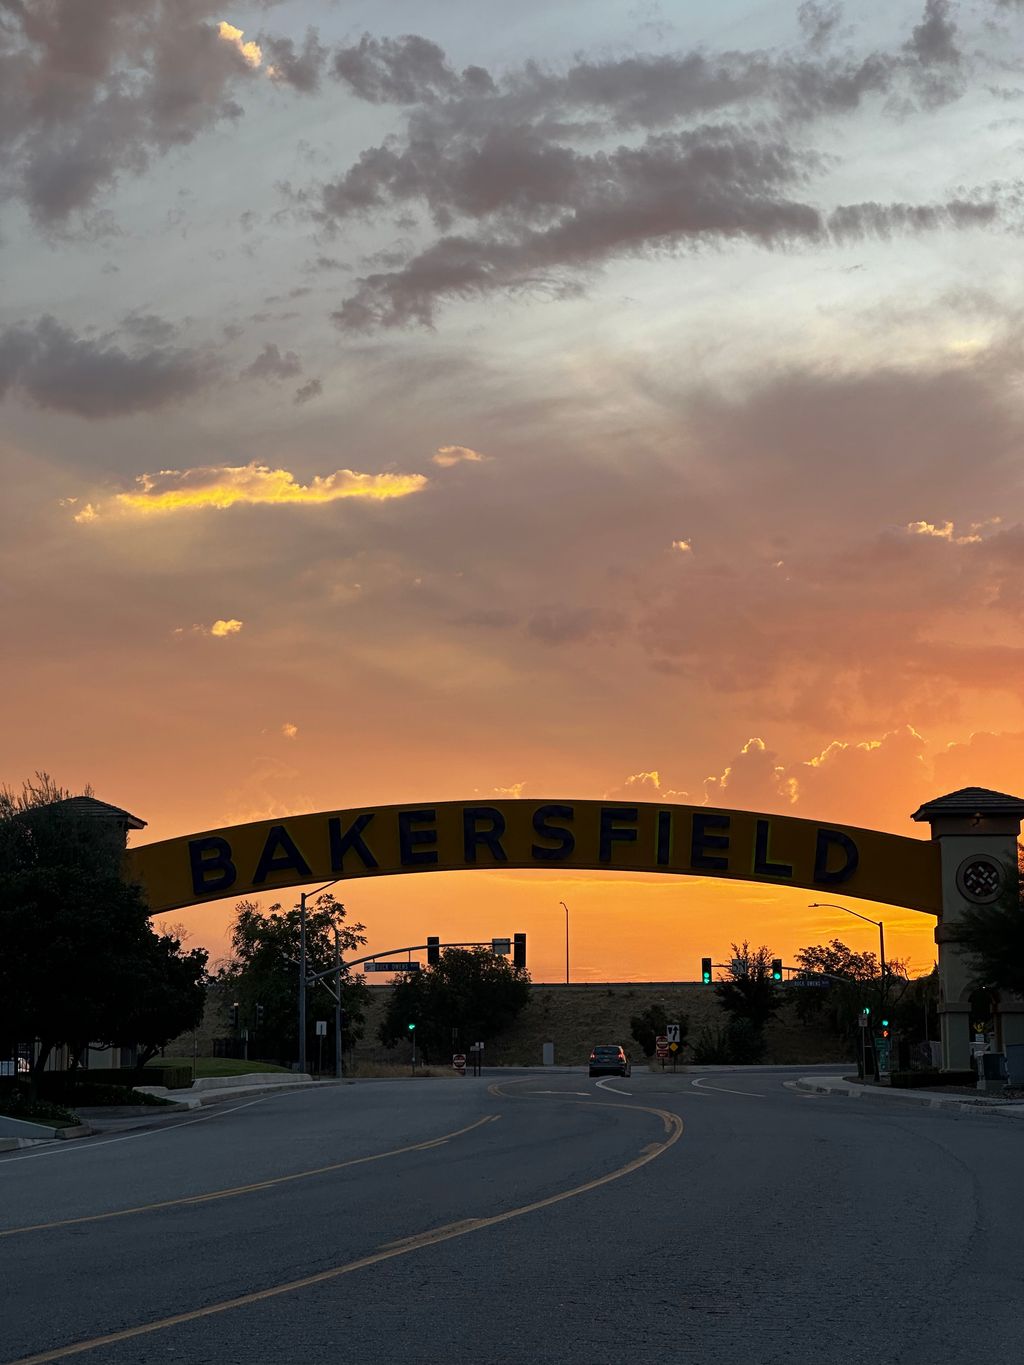 The Bakersfield Sign